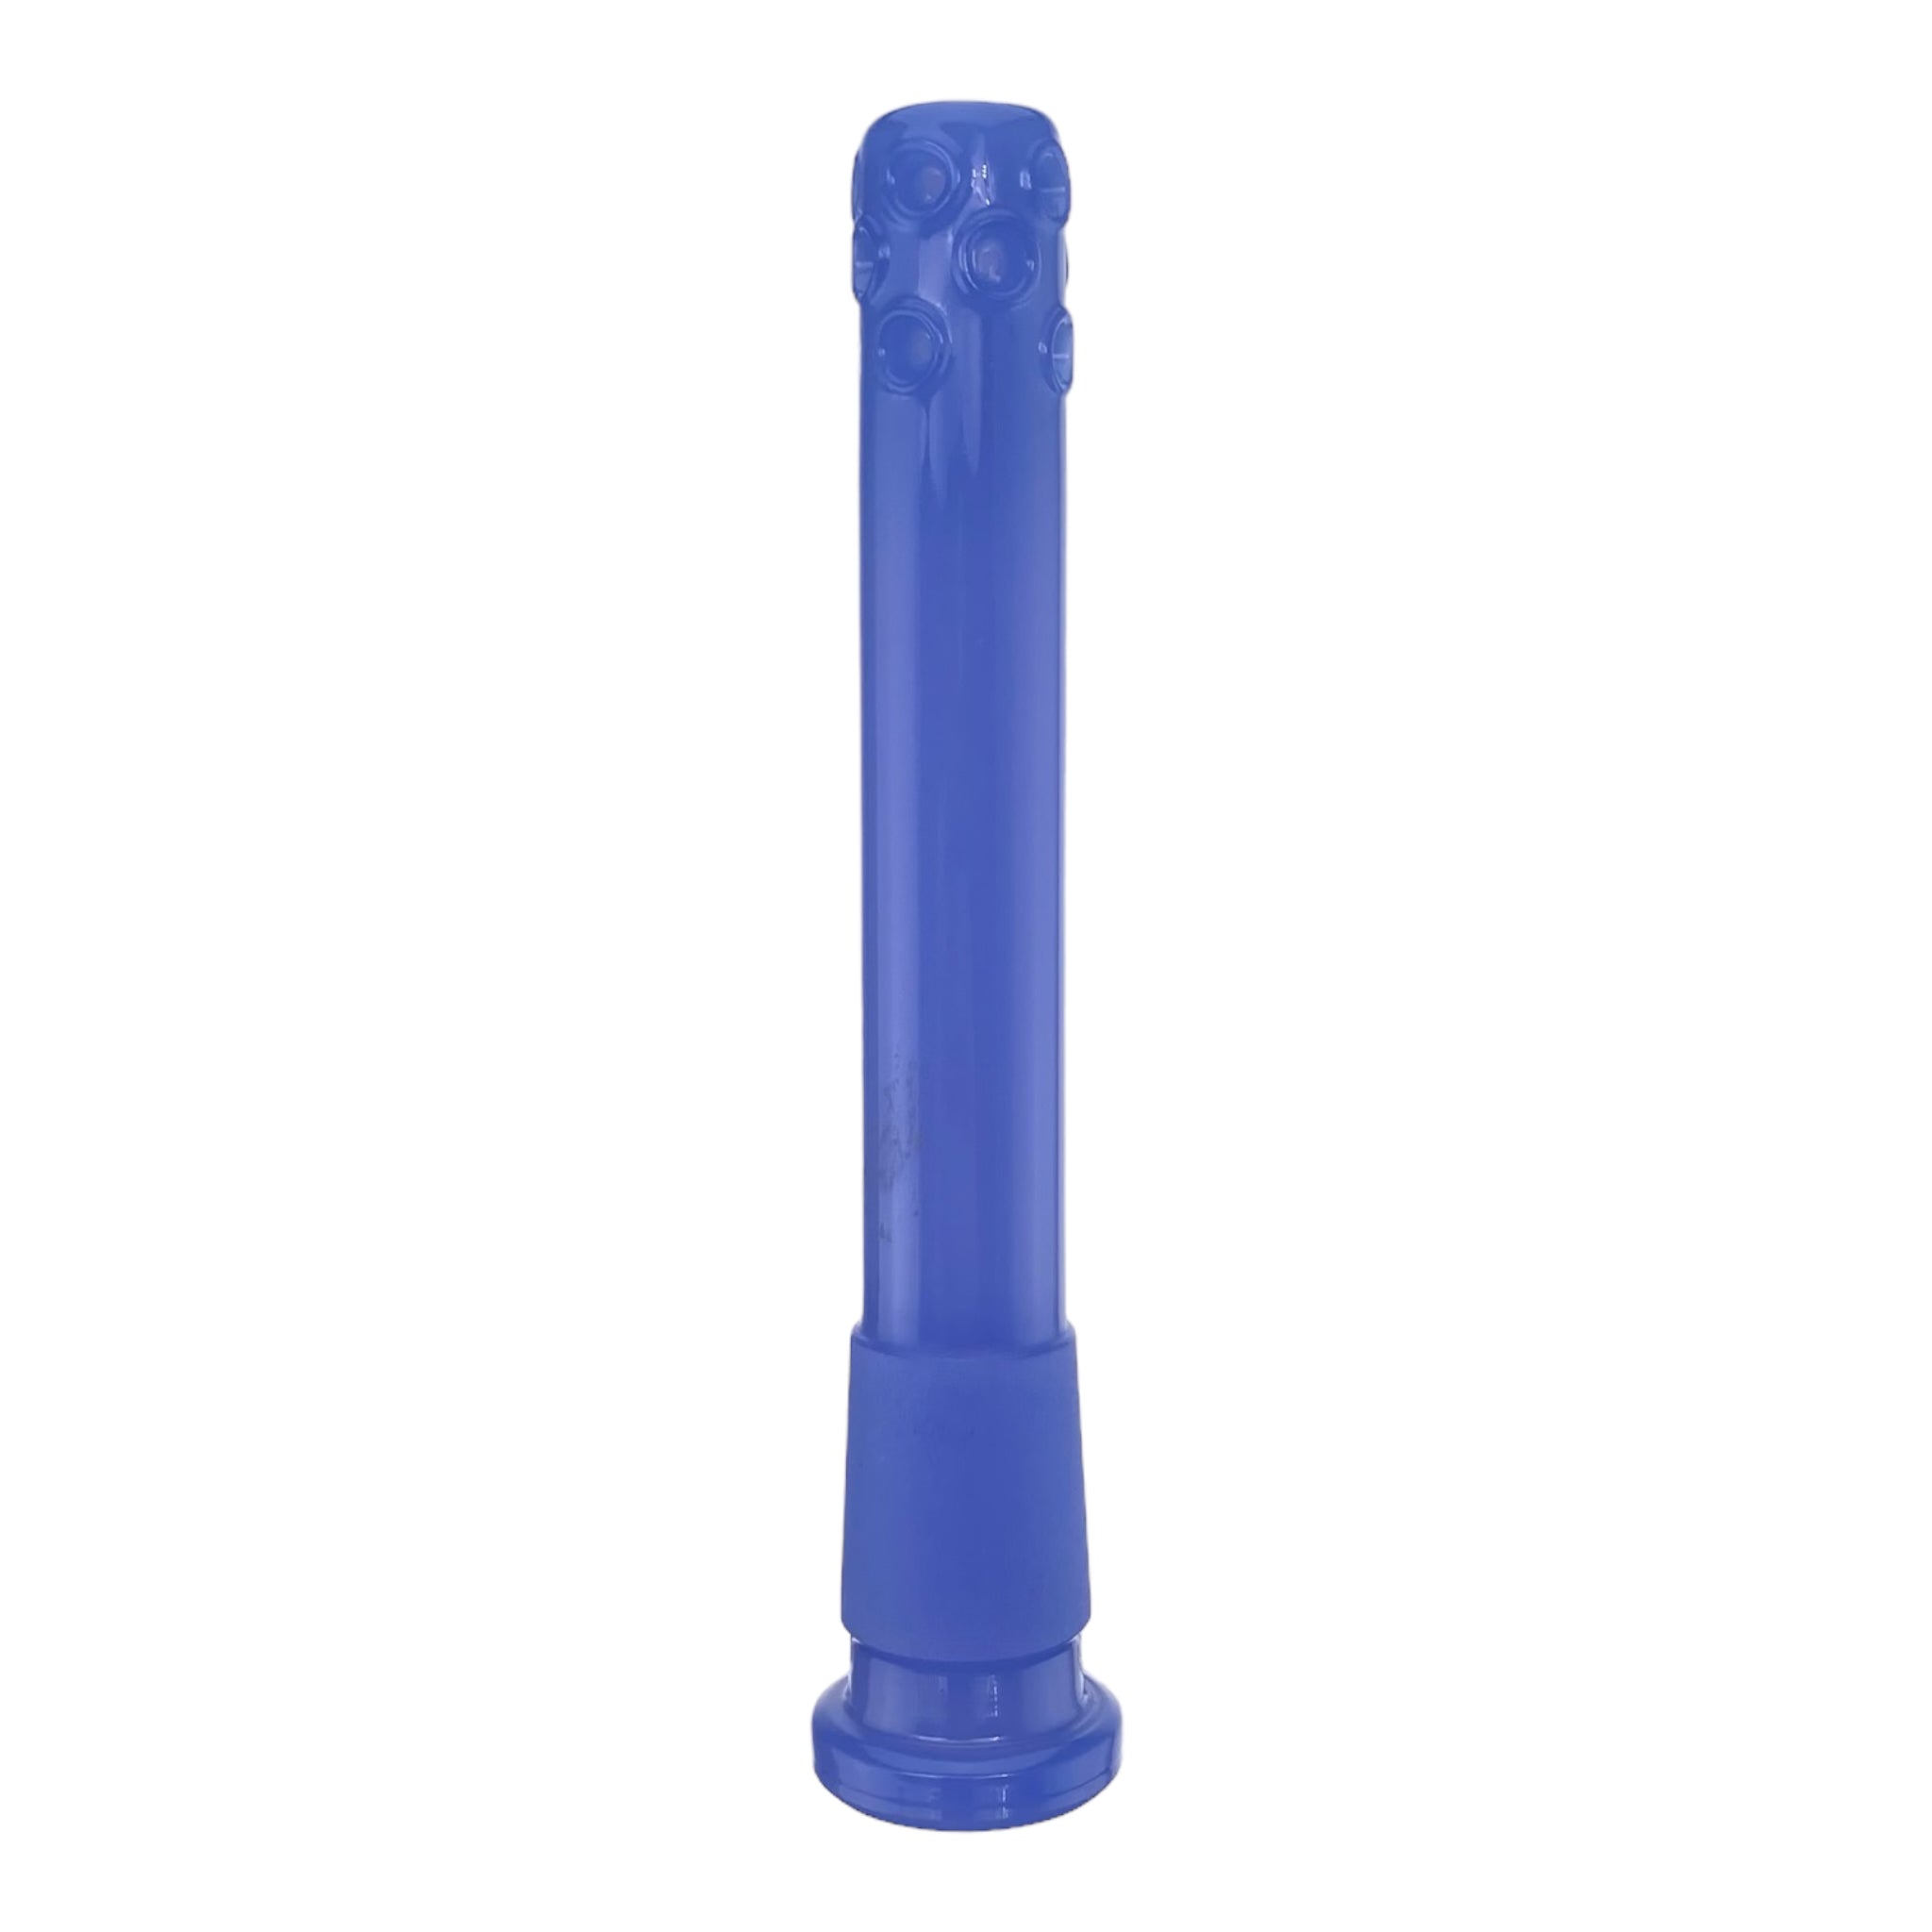 Periwinkle 5 Inch 18mm - 14mm Downstem For Glass Bong